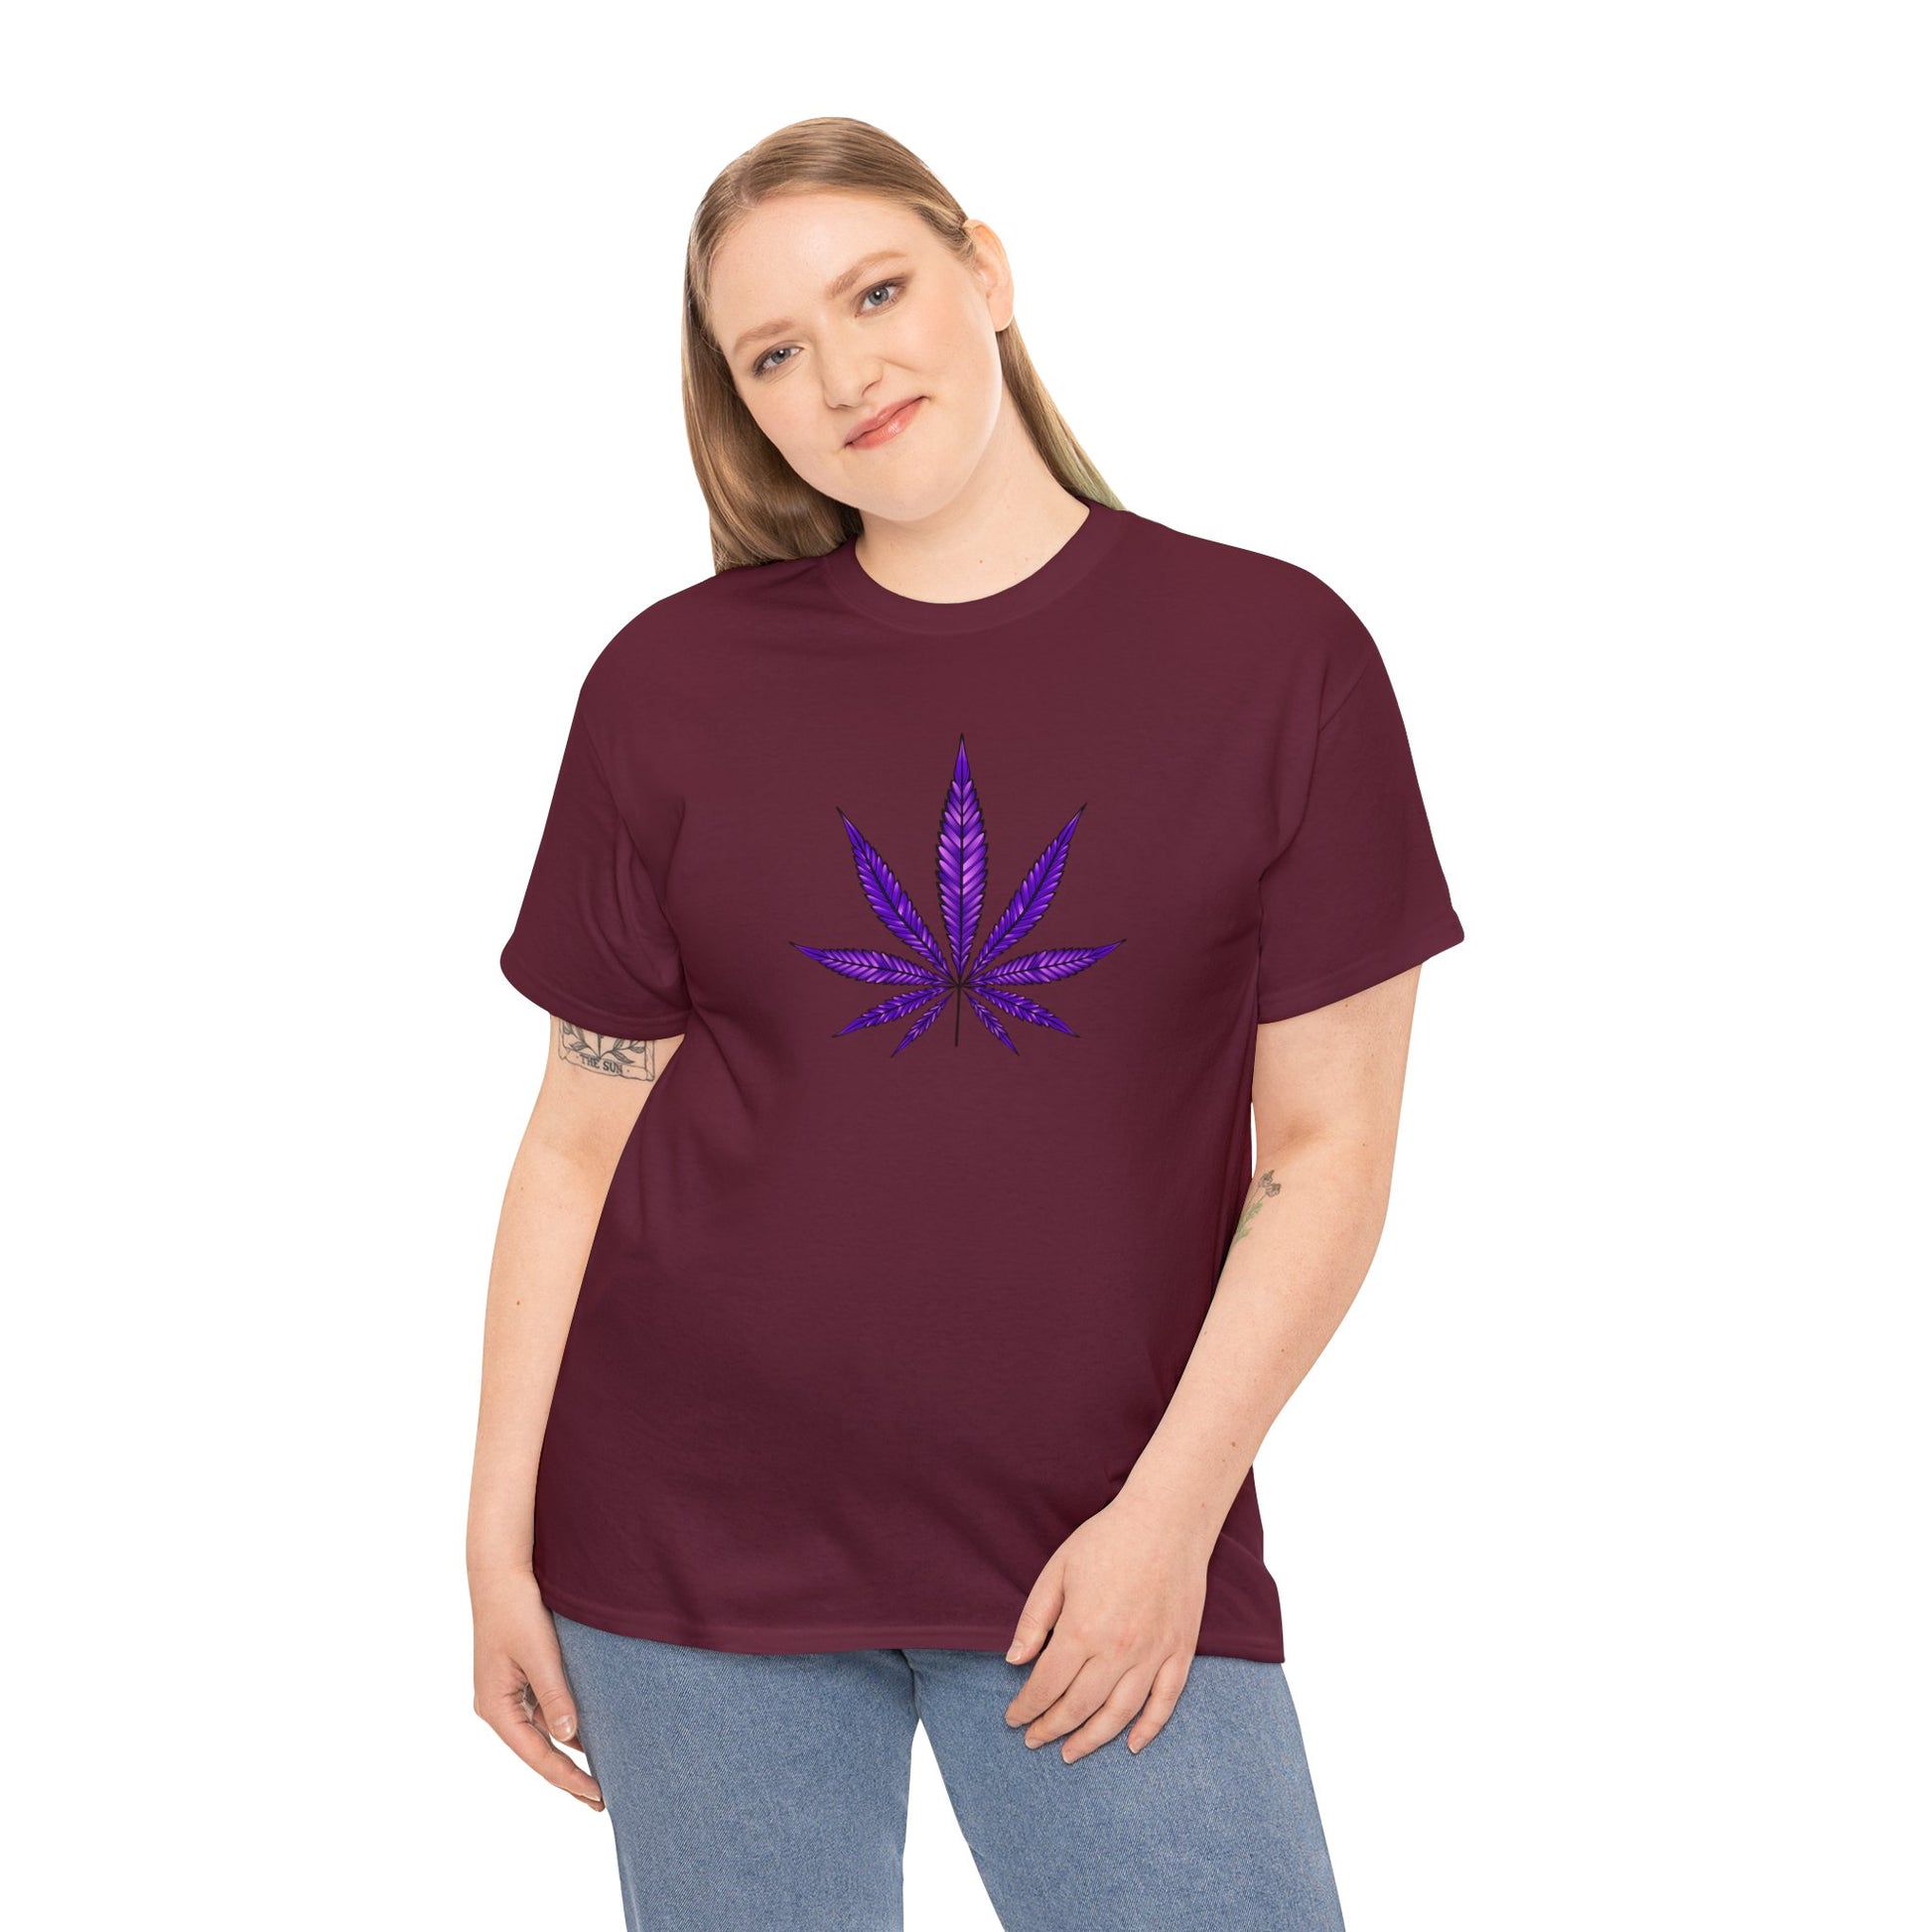 A woman wearing a Purple Cannabis Leaf Tee stands facing the camera.